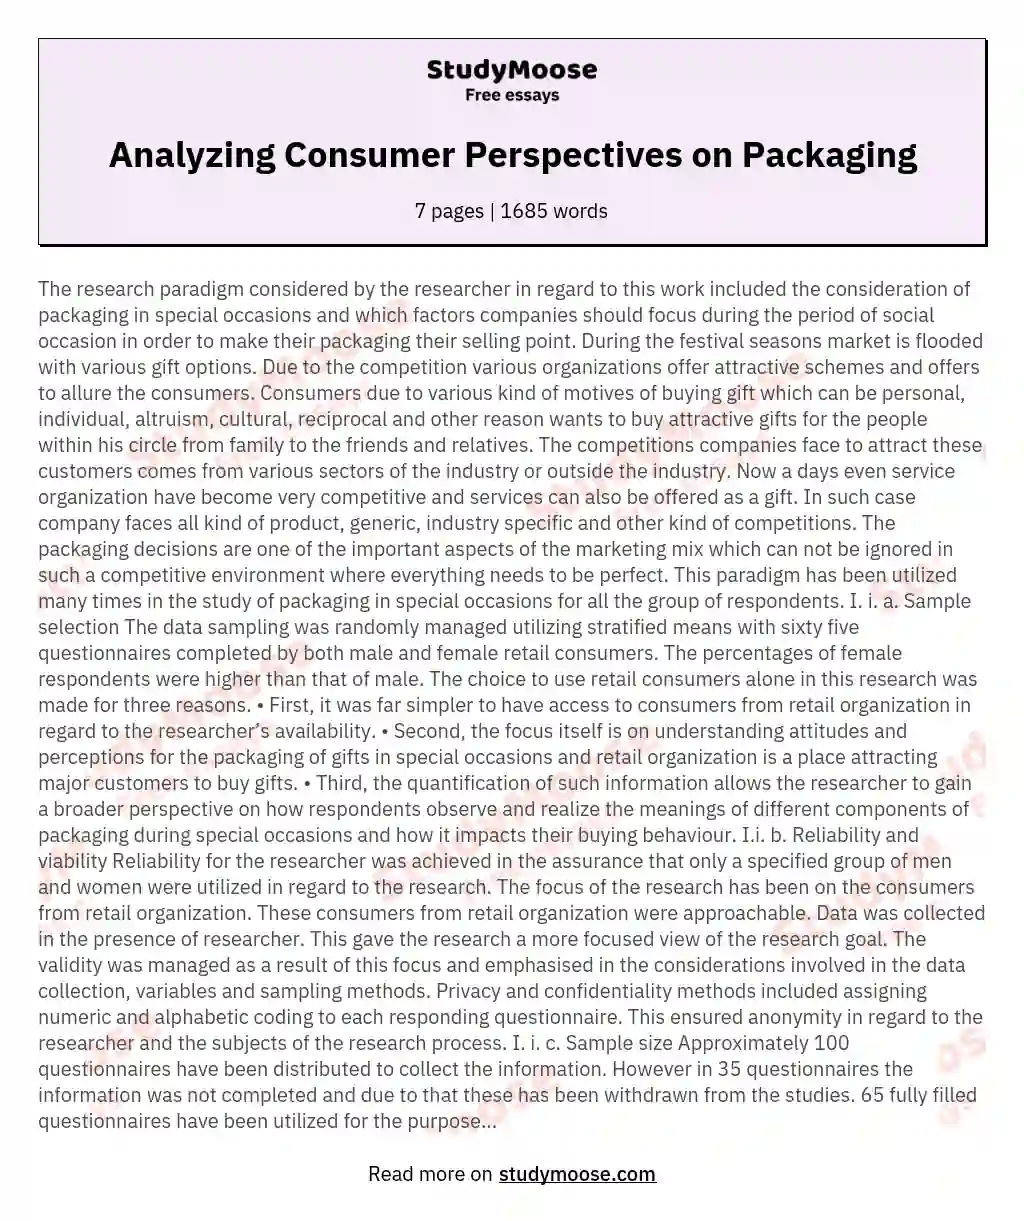 Analyzing Consumer Perspectives on Packaging essay